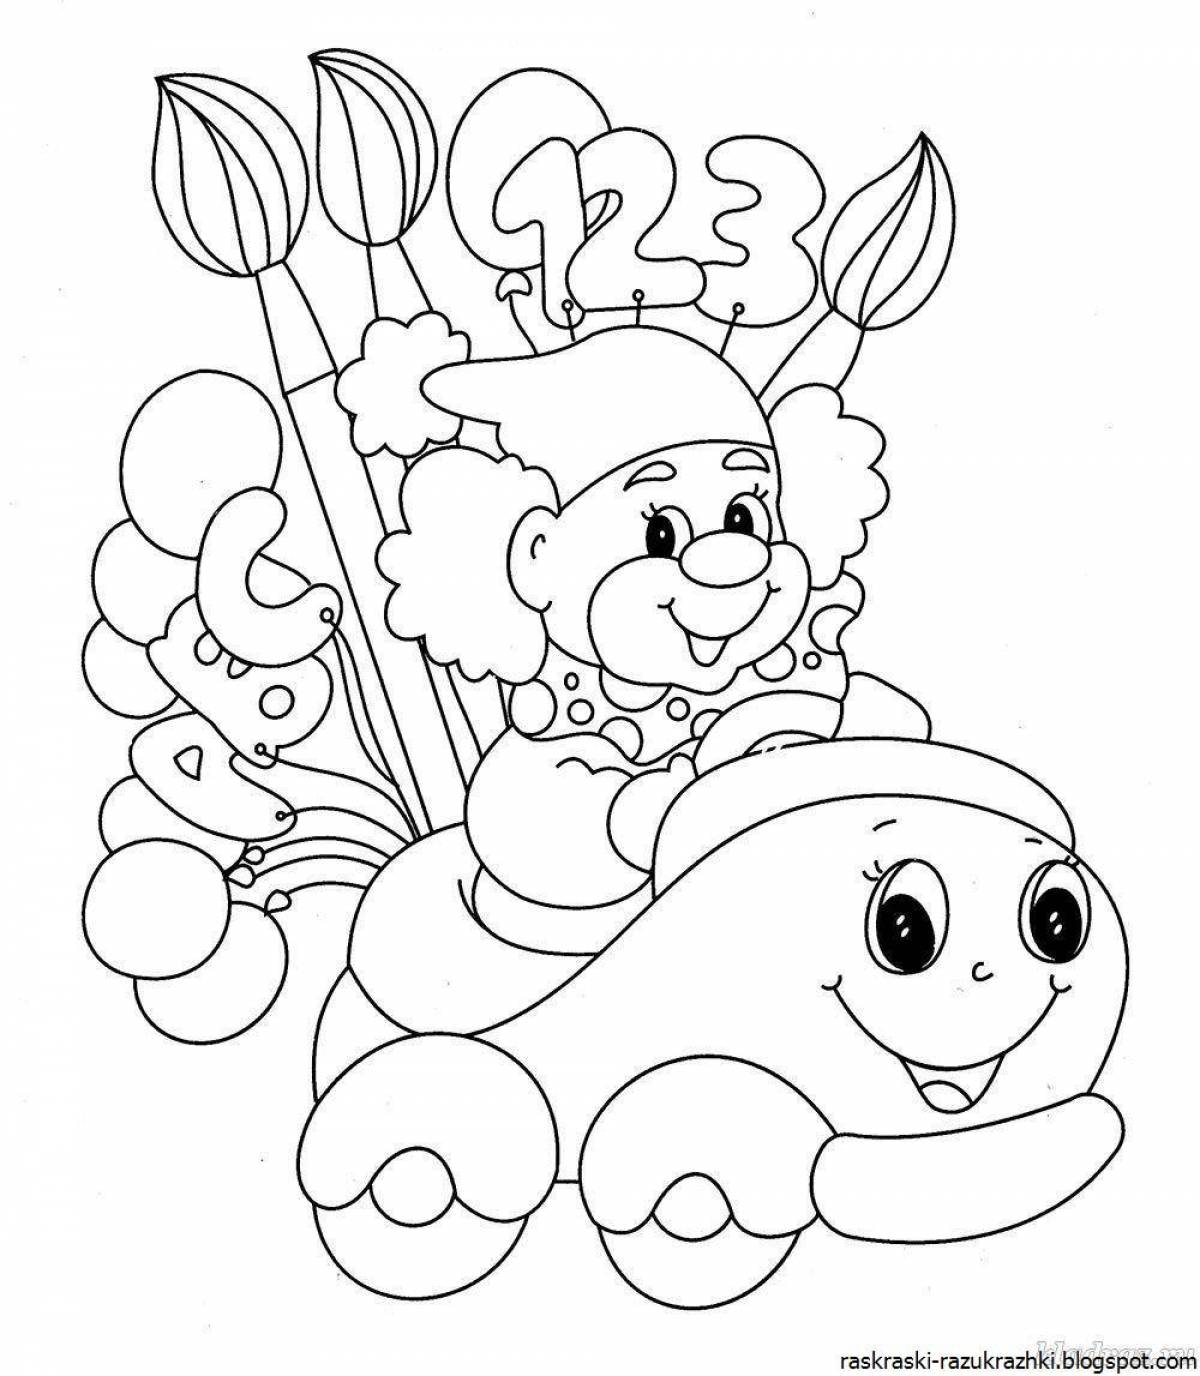 Joyful coloring book for children 5 years old